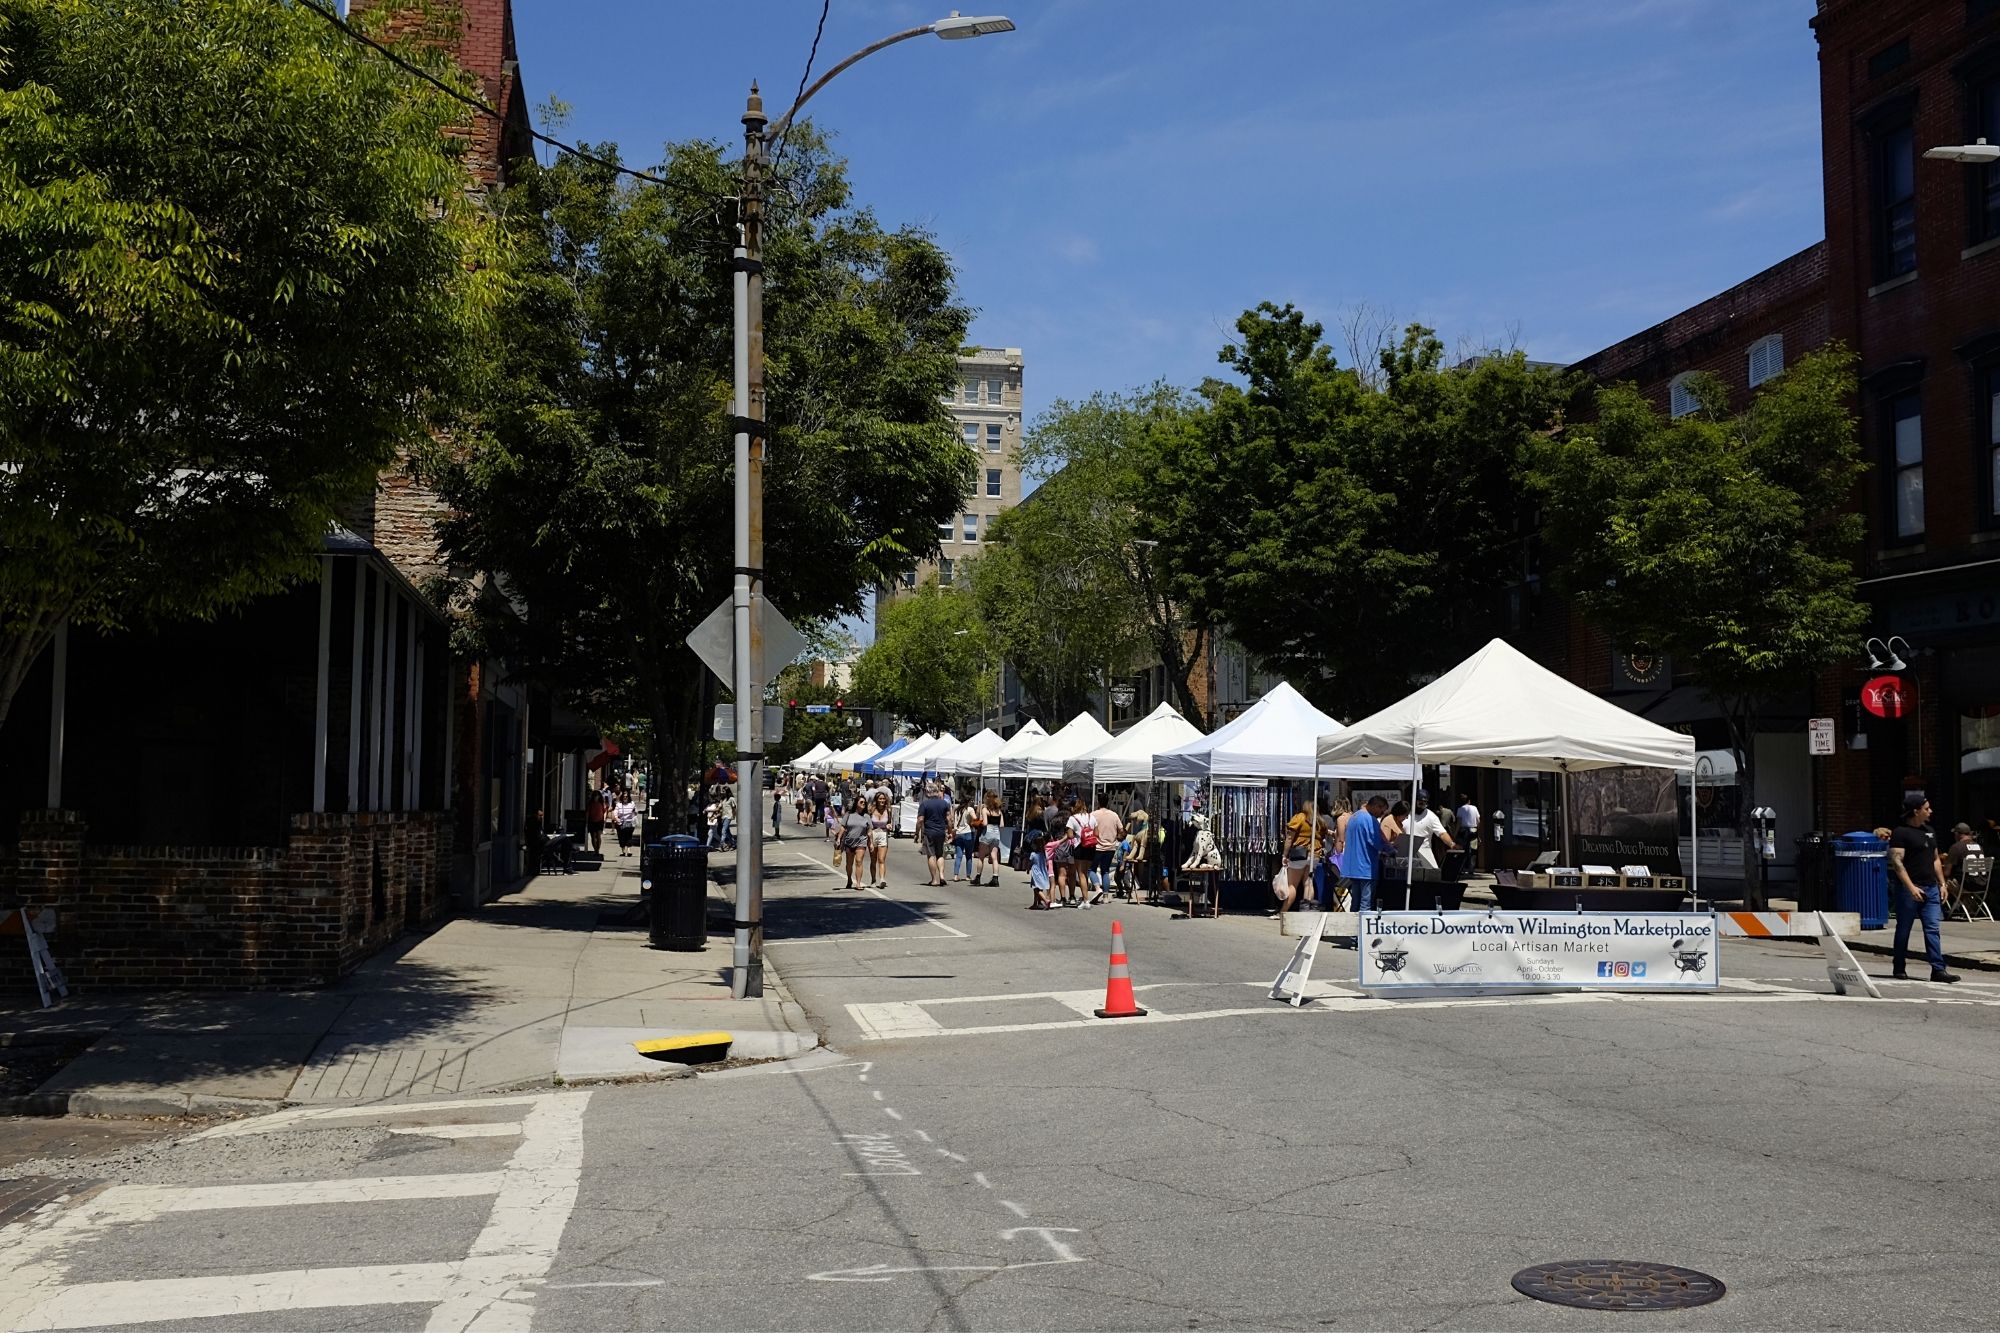 View of the Artisan market tents lining the street